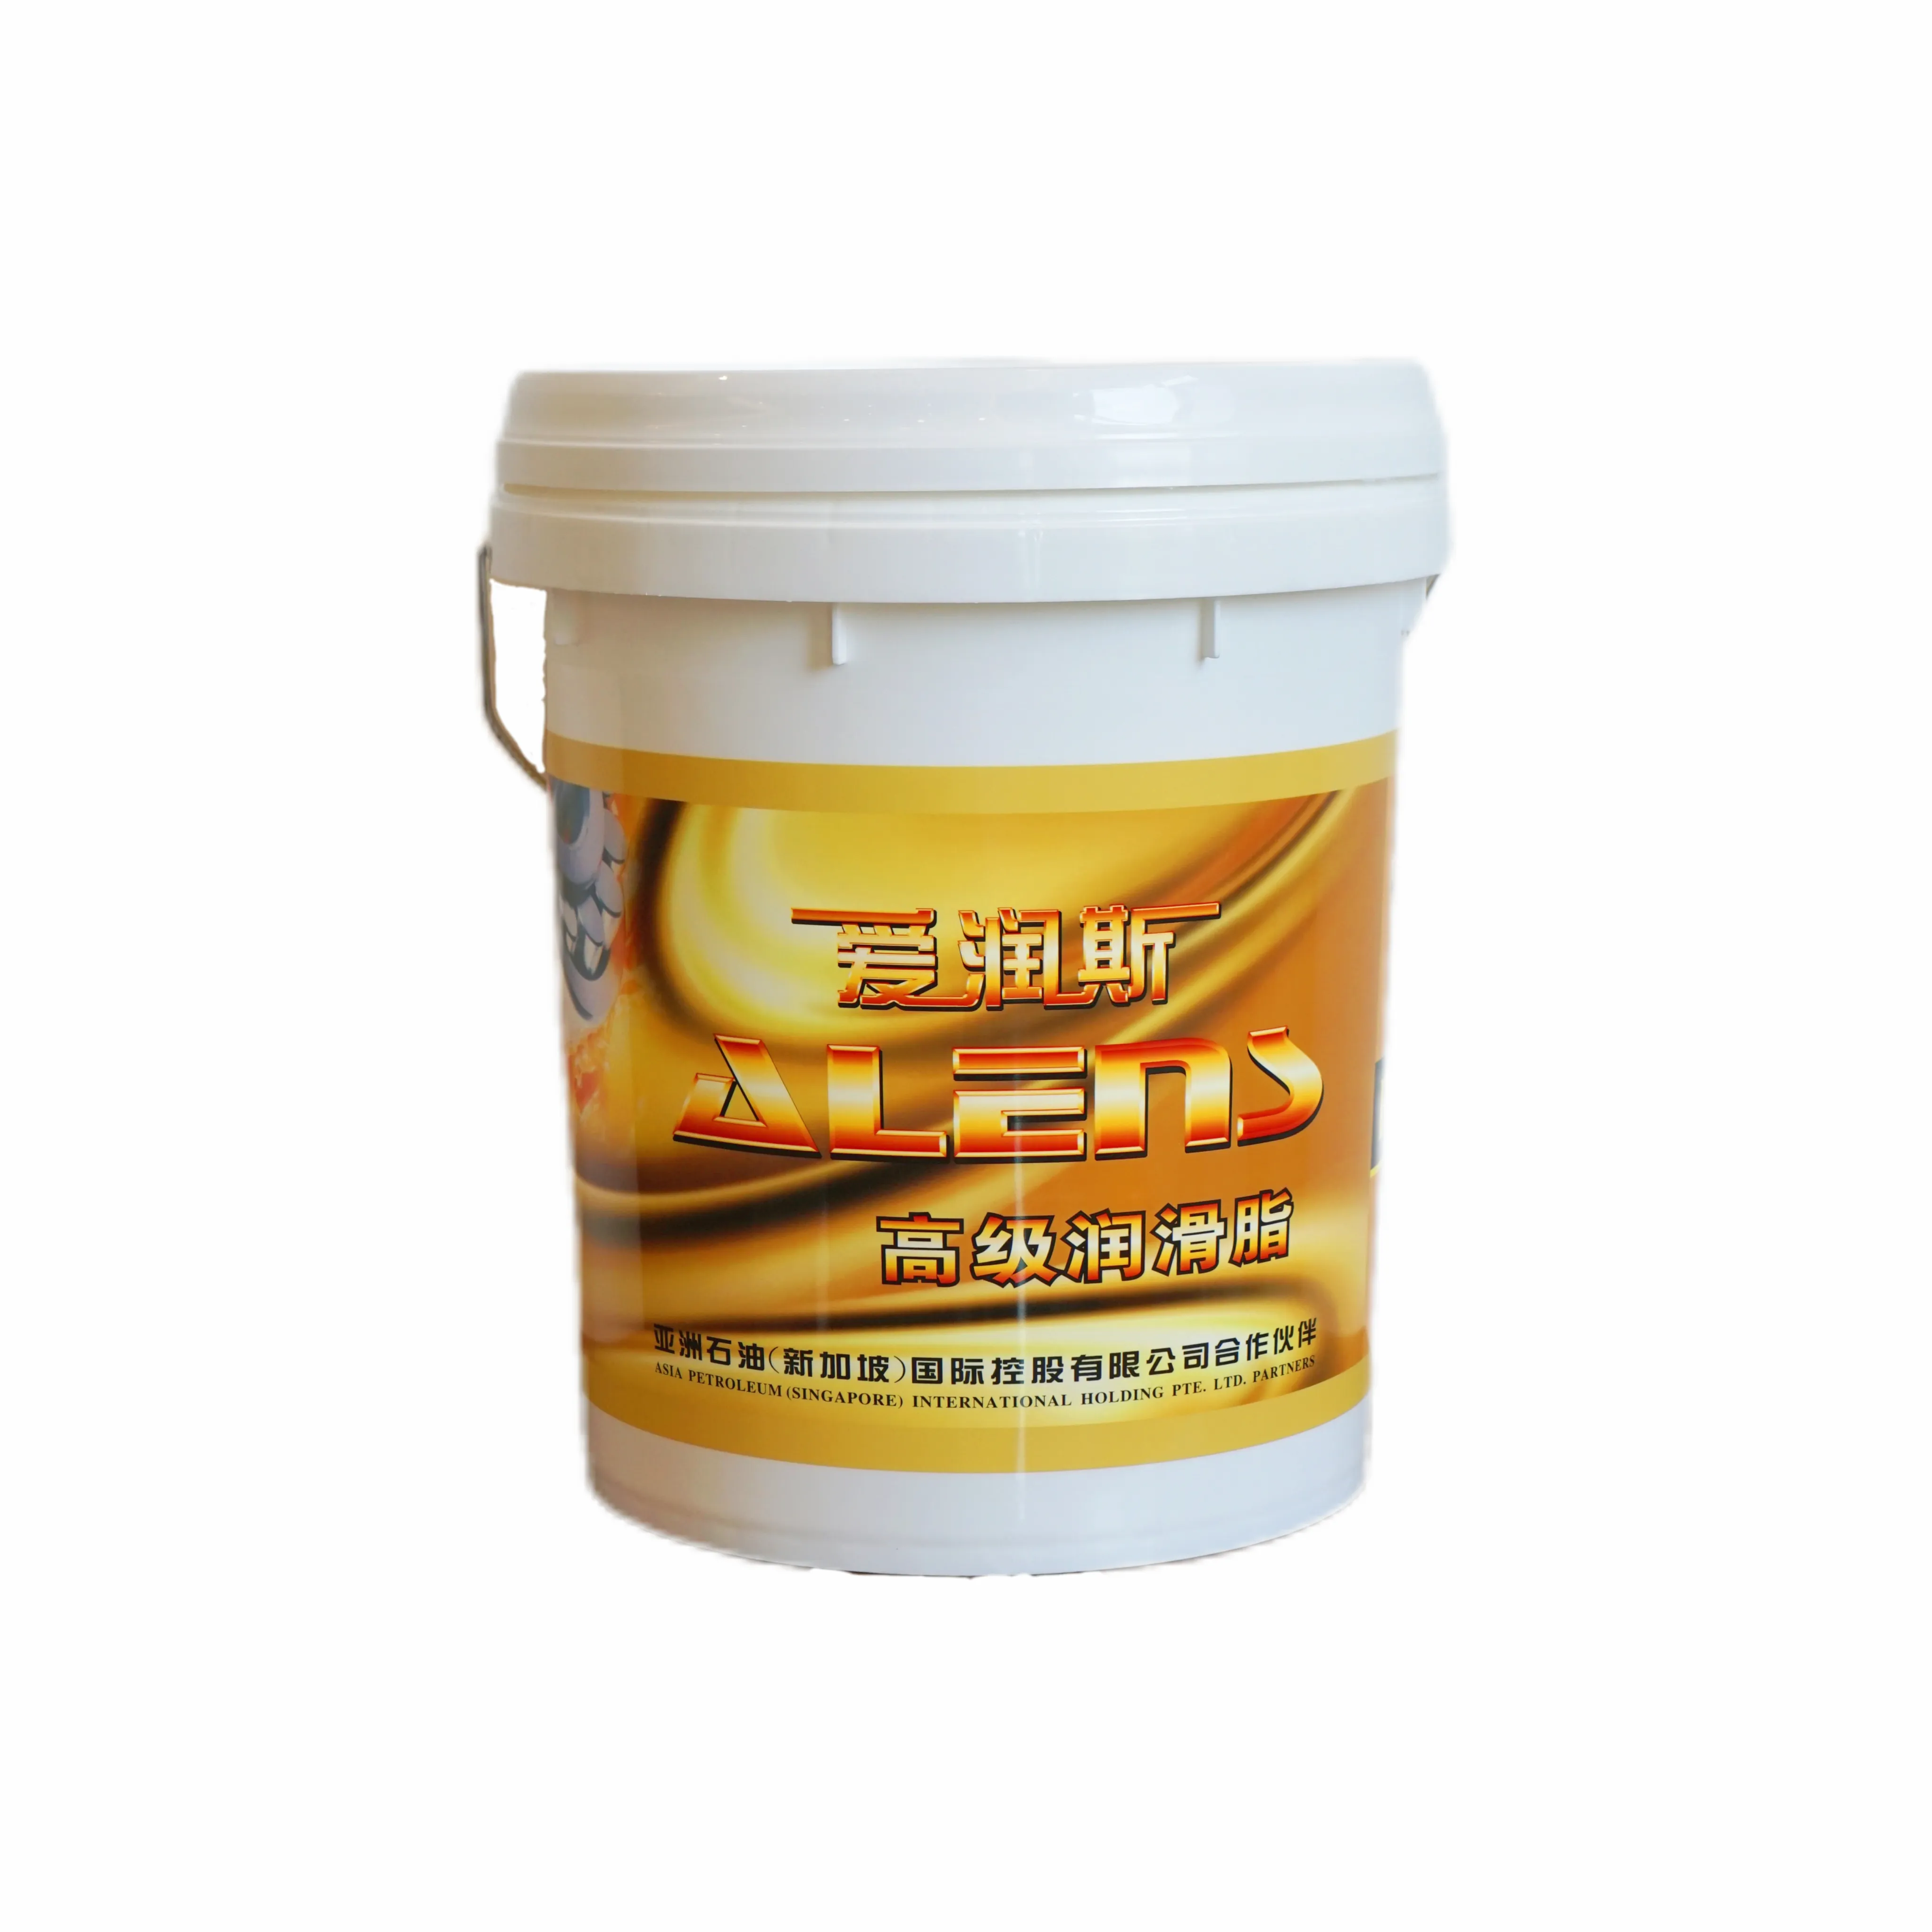 Jiajinbao Wholesale Products Complex Lithium Soap Extreme Pressure Lithium Based Grease